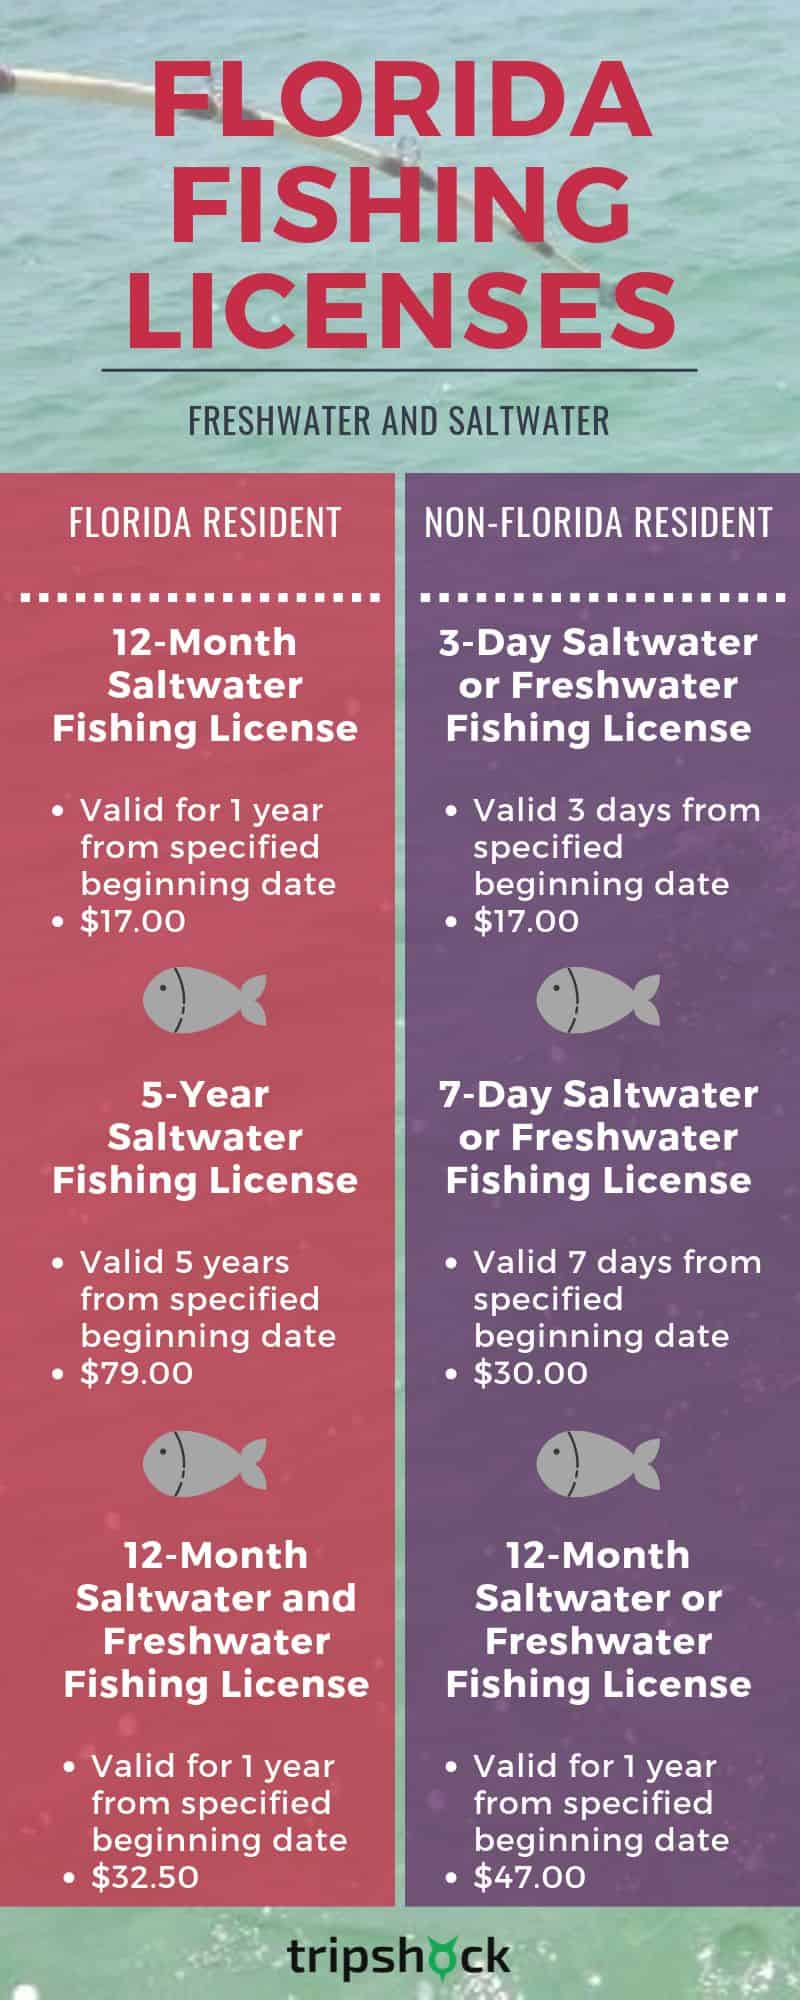 saltwater and freshwater fishing license prices and information